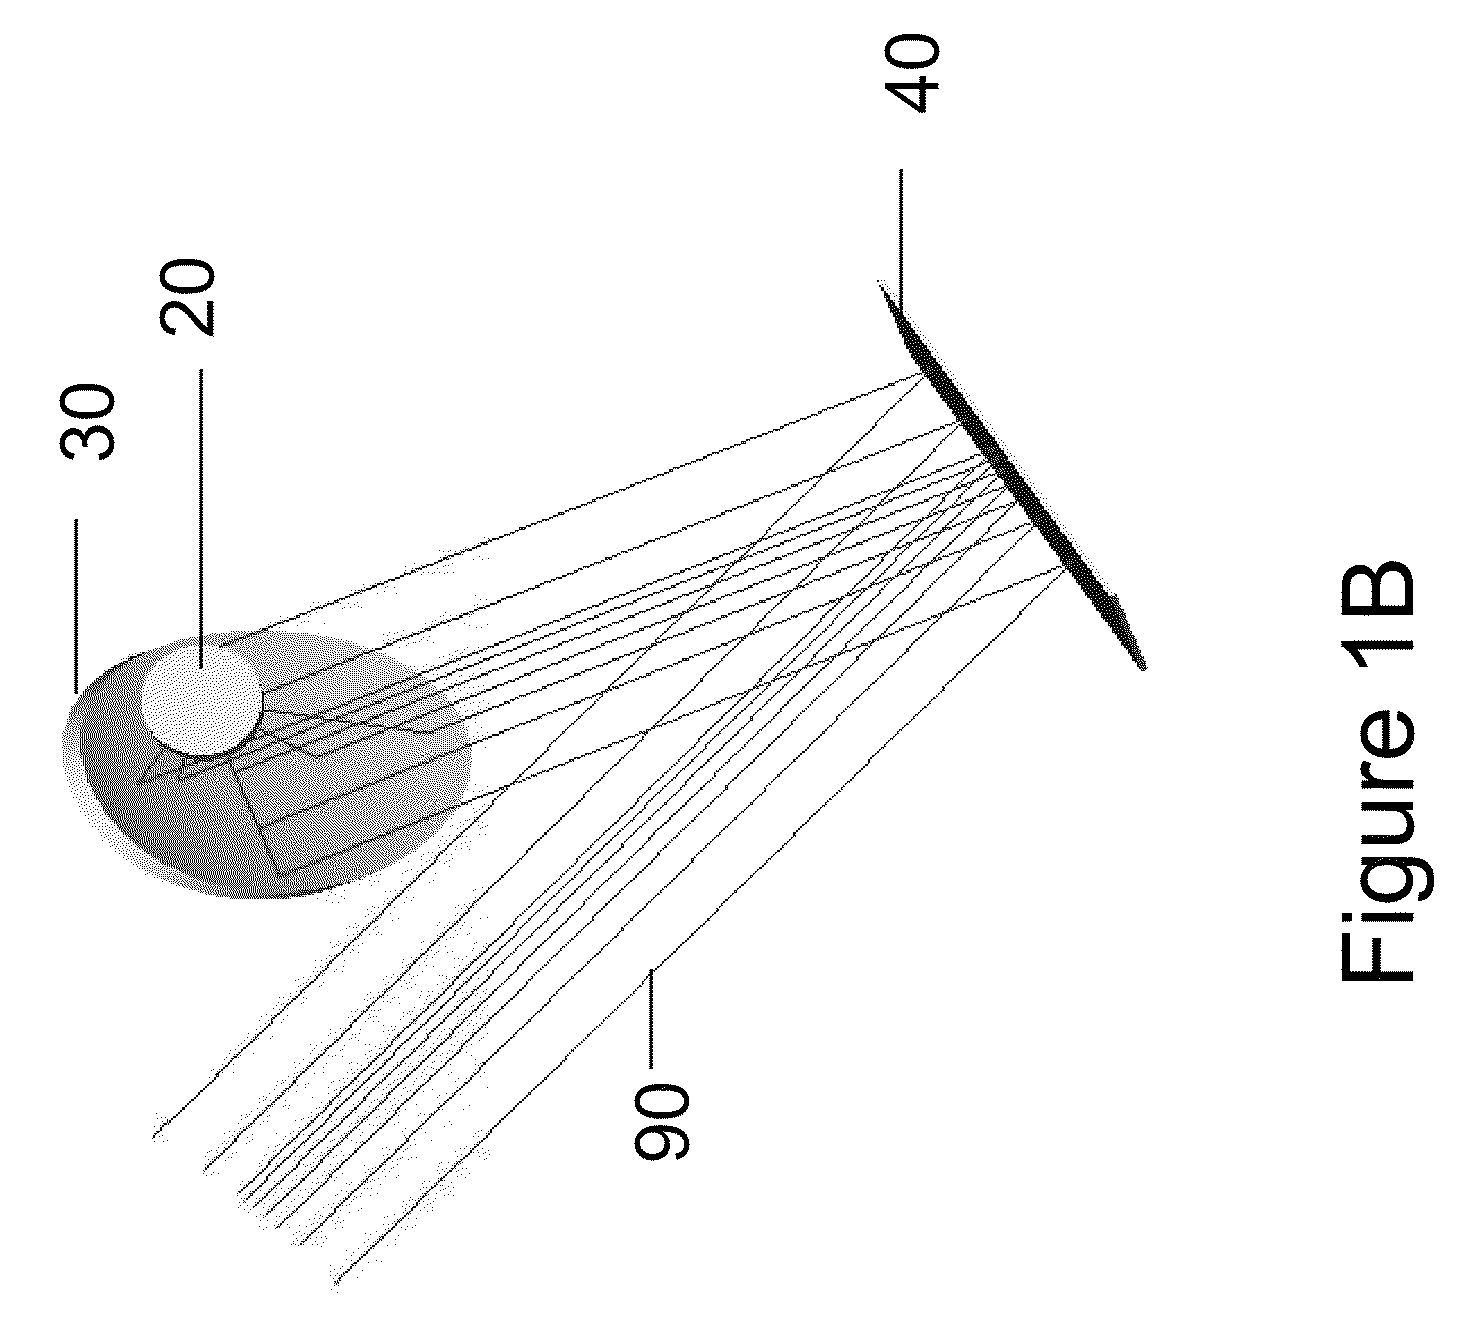 All reflective apparatus for injecting excitation light and collecting in-elastically scattered light from a sample